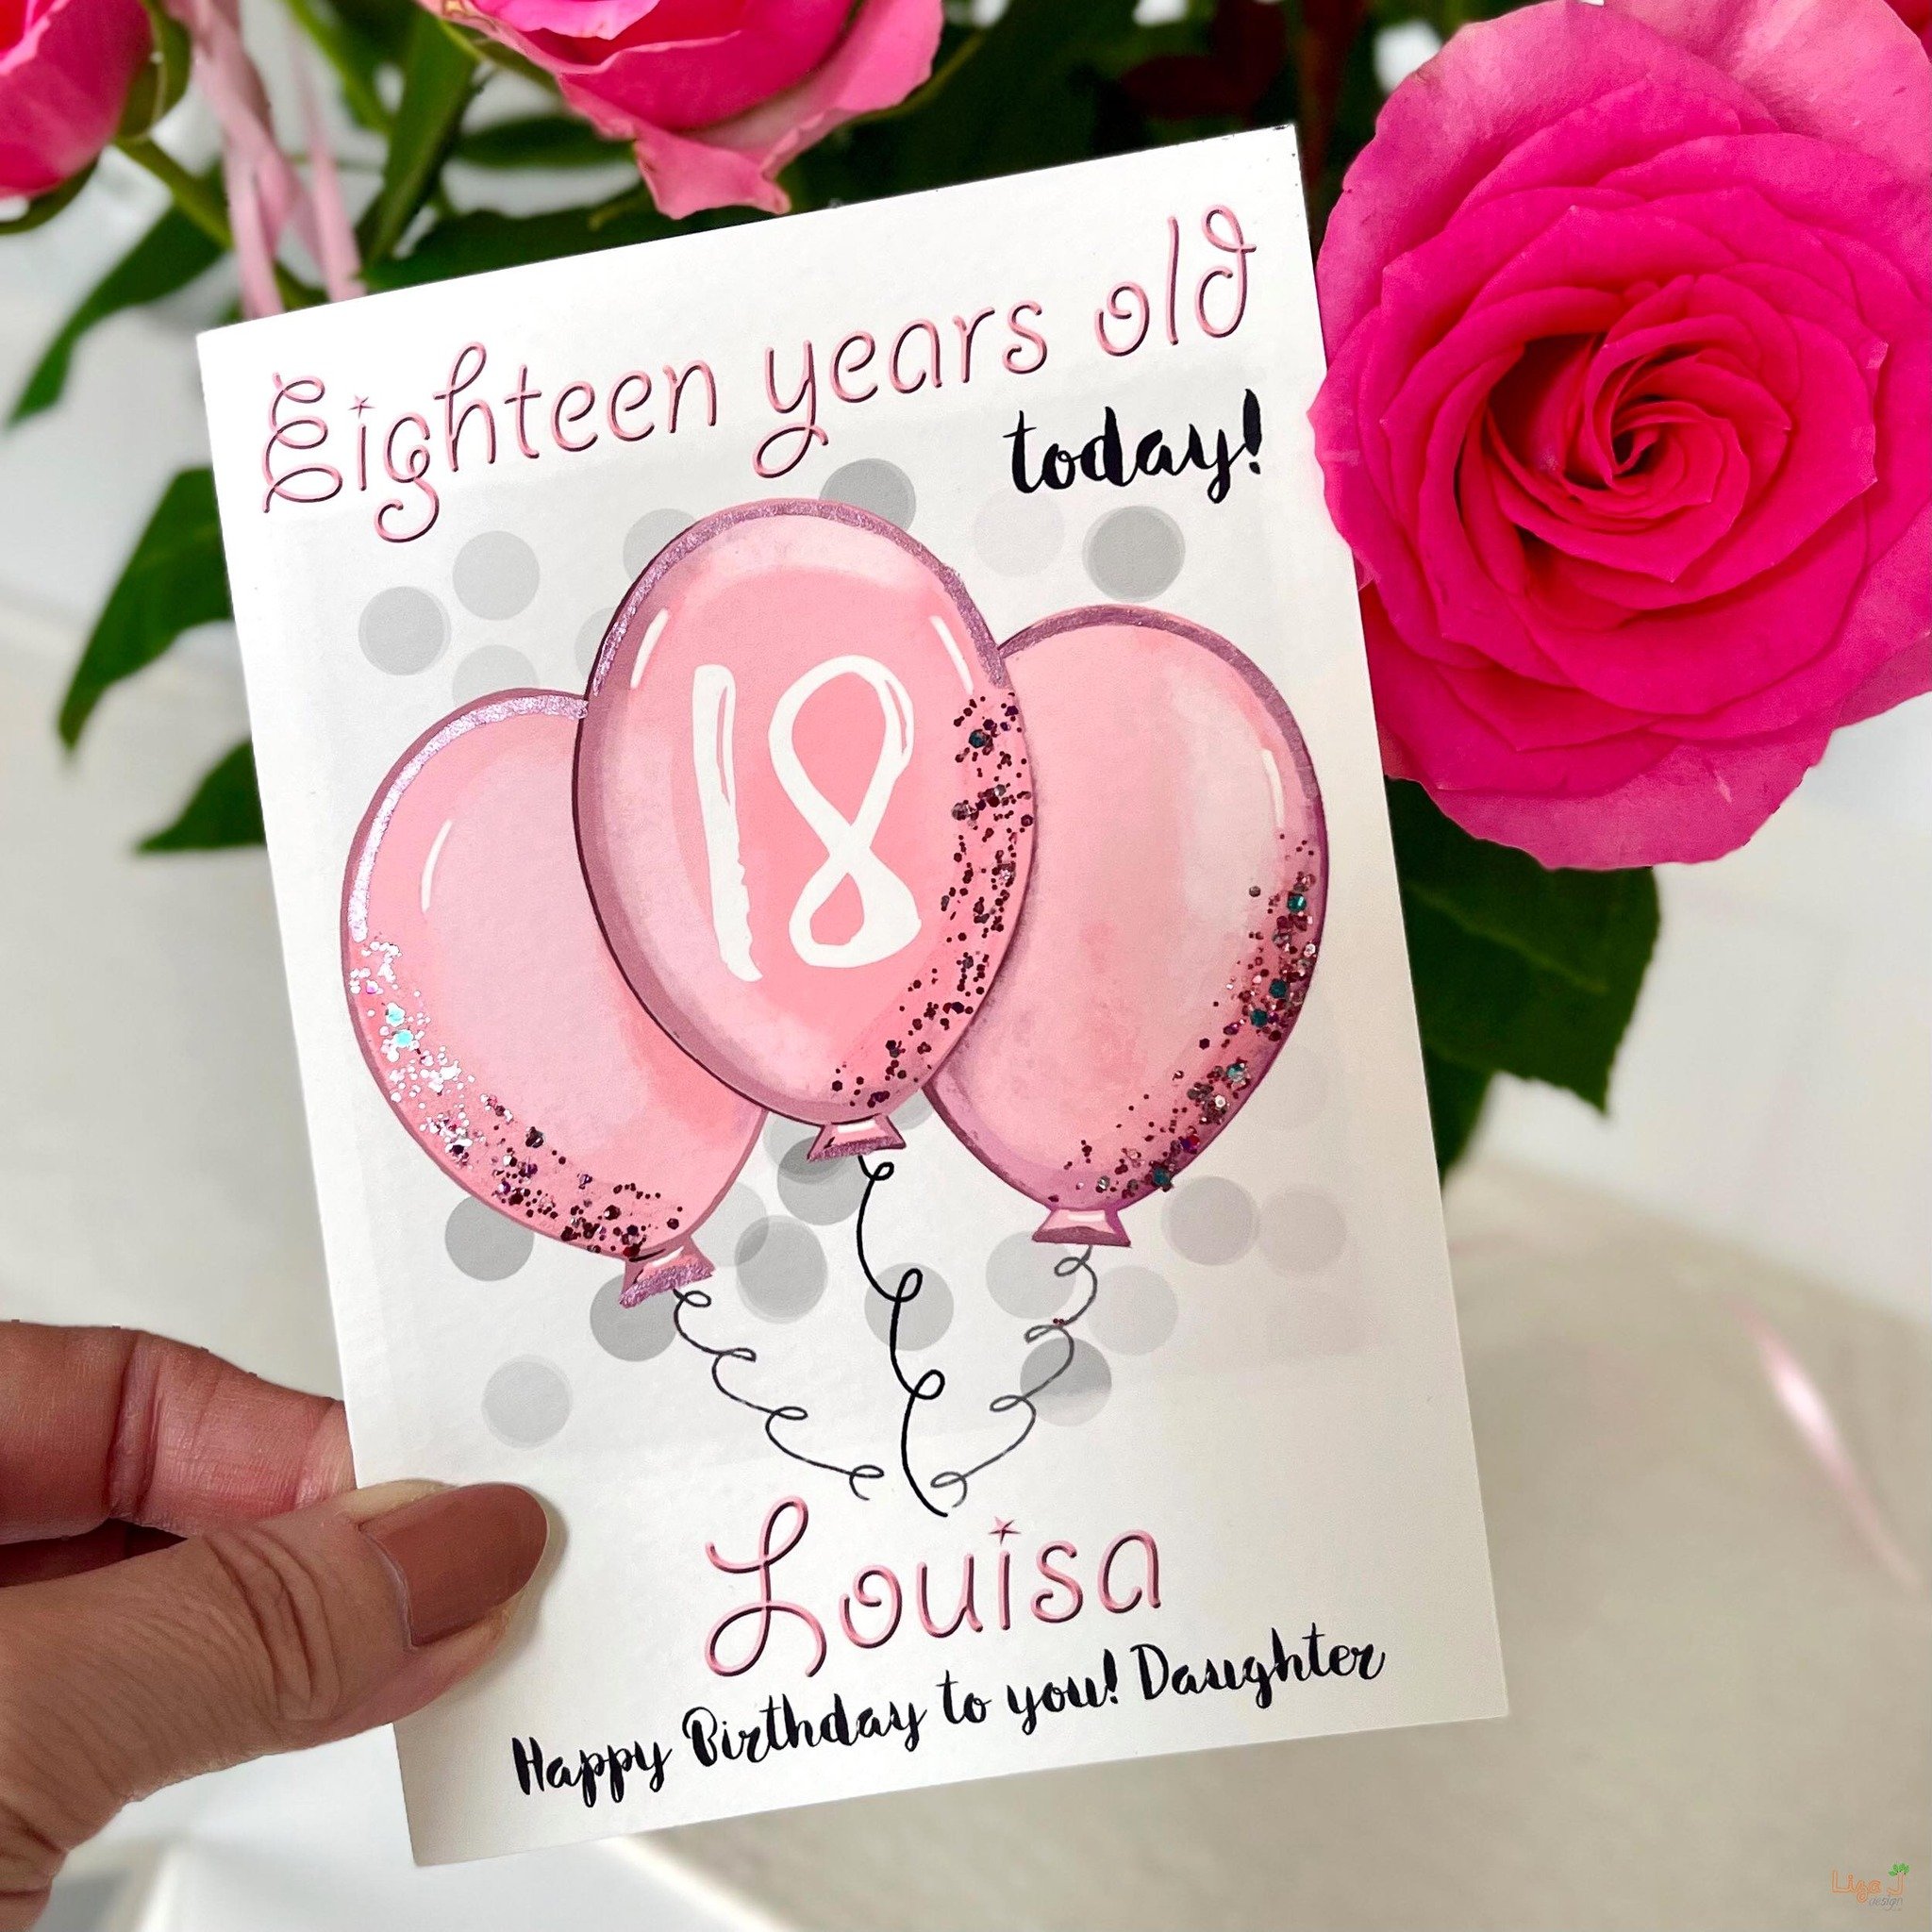 The popular balloon card has new colour options - shown here in light pink 🎈